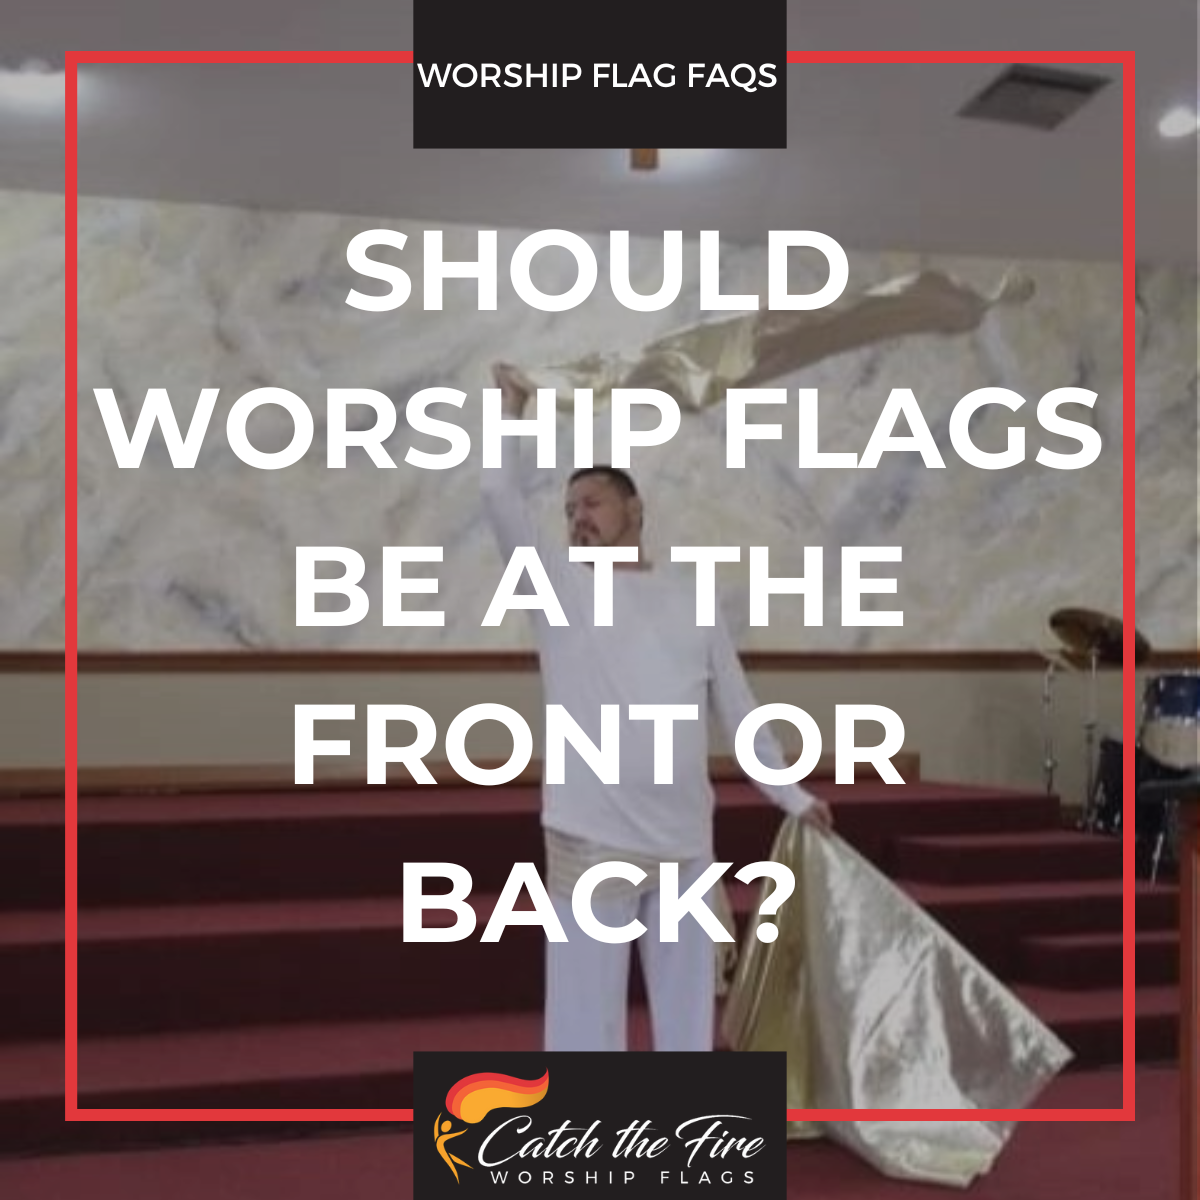 Do Worship Flags Belong at the Front of the Church?